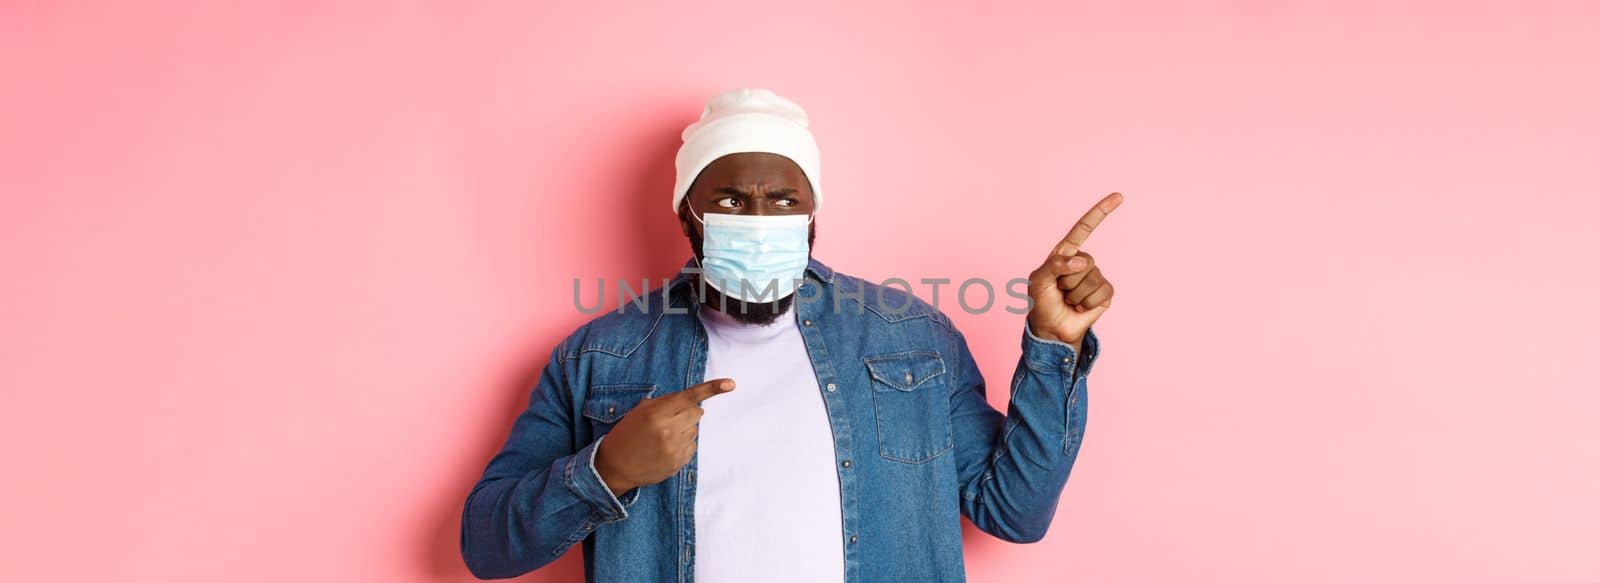 Coronavirus, lifestyle and global pandemic concept. Confused and disappointed african-american guy in face mask pointing fingers left, staring upset with camera, pink background.